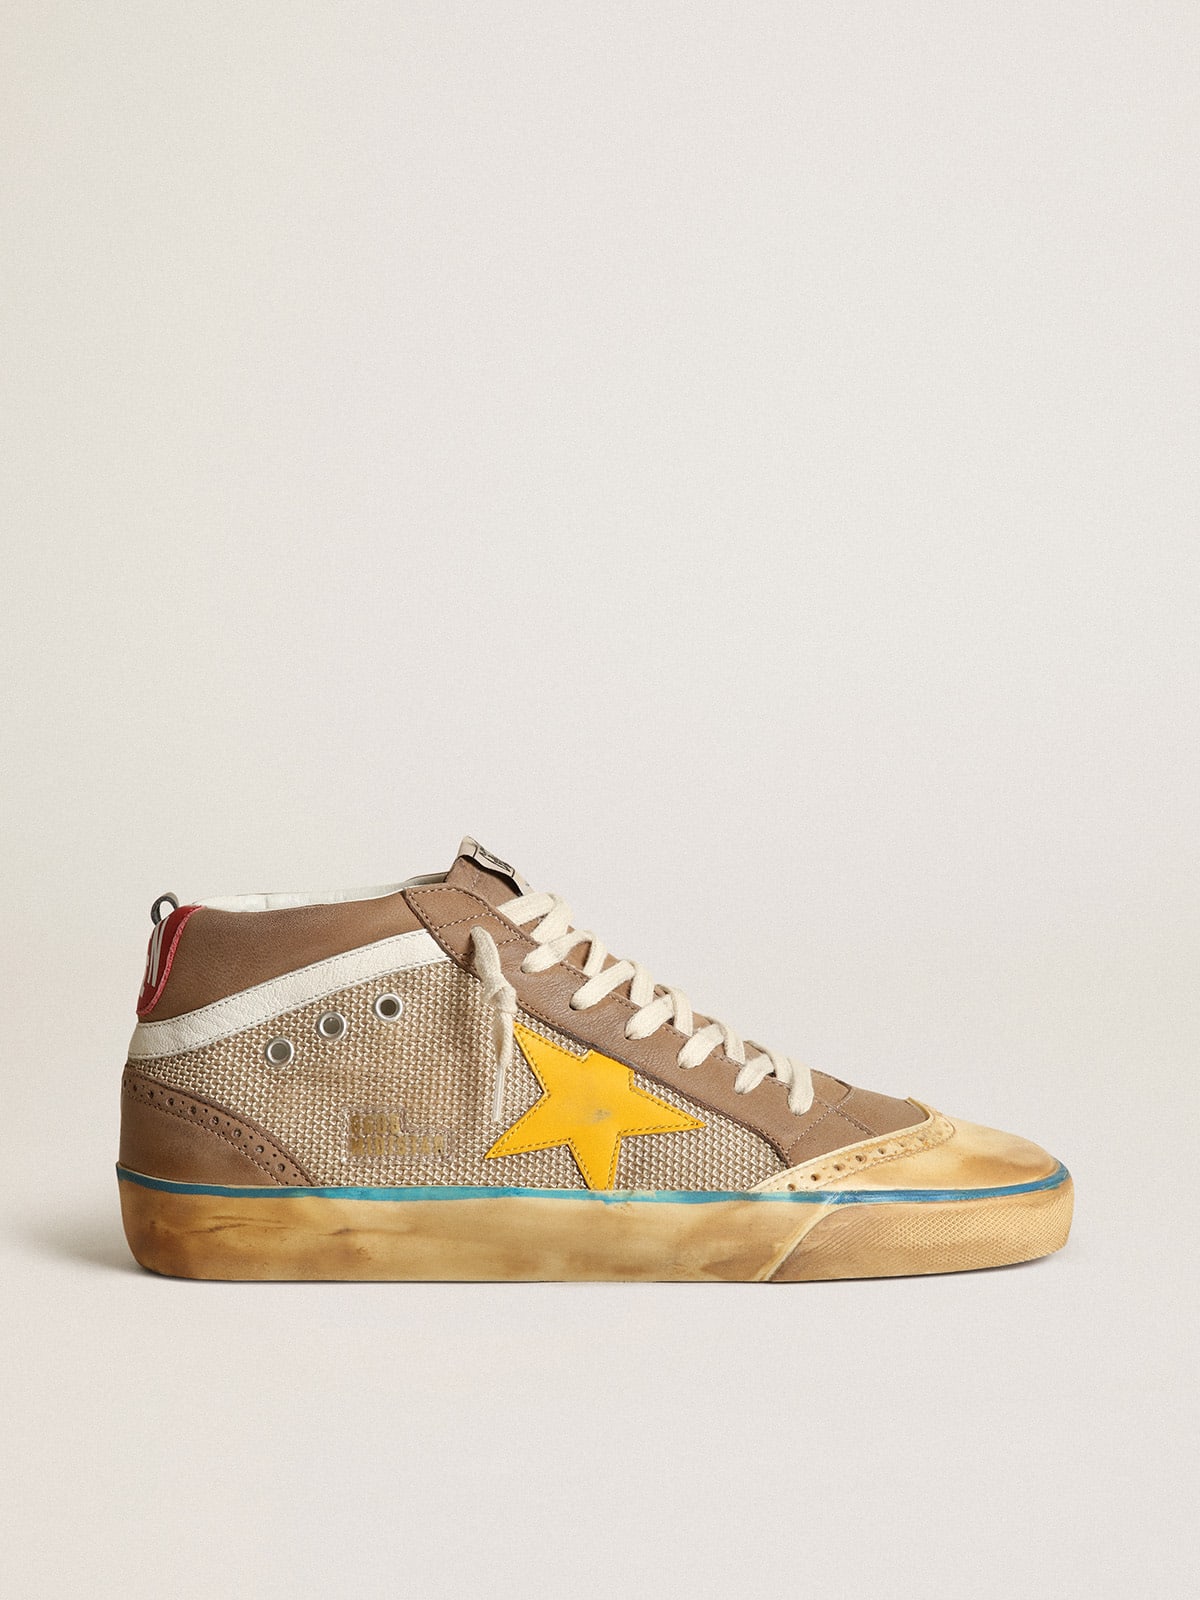 Mid Star sneakers in beige mesh and dove-gray nubuck with yellow leather star